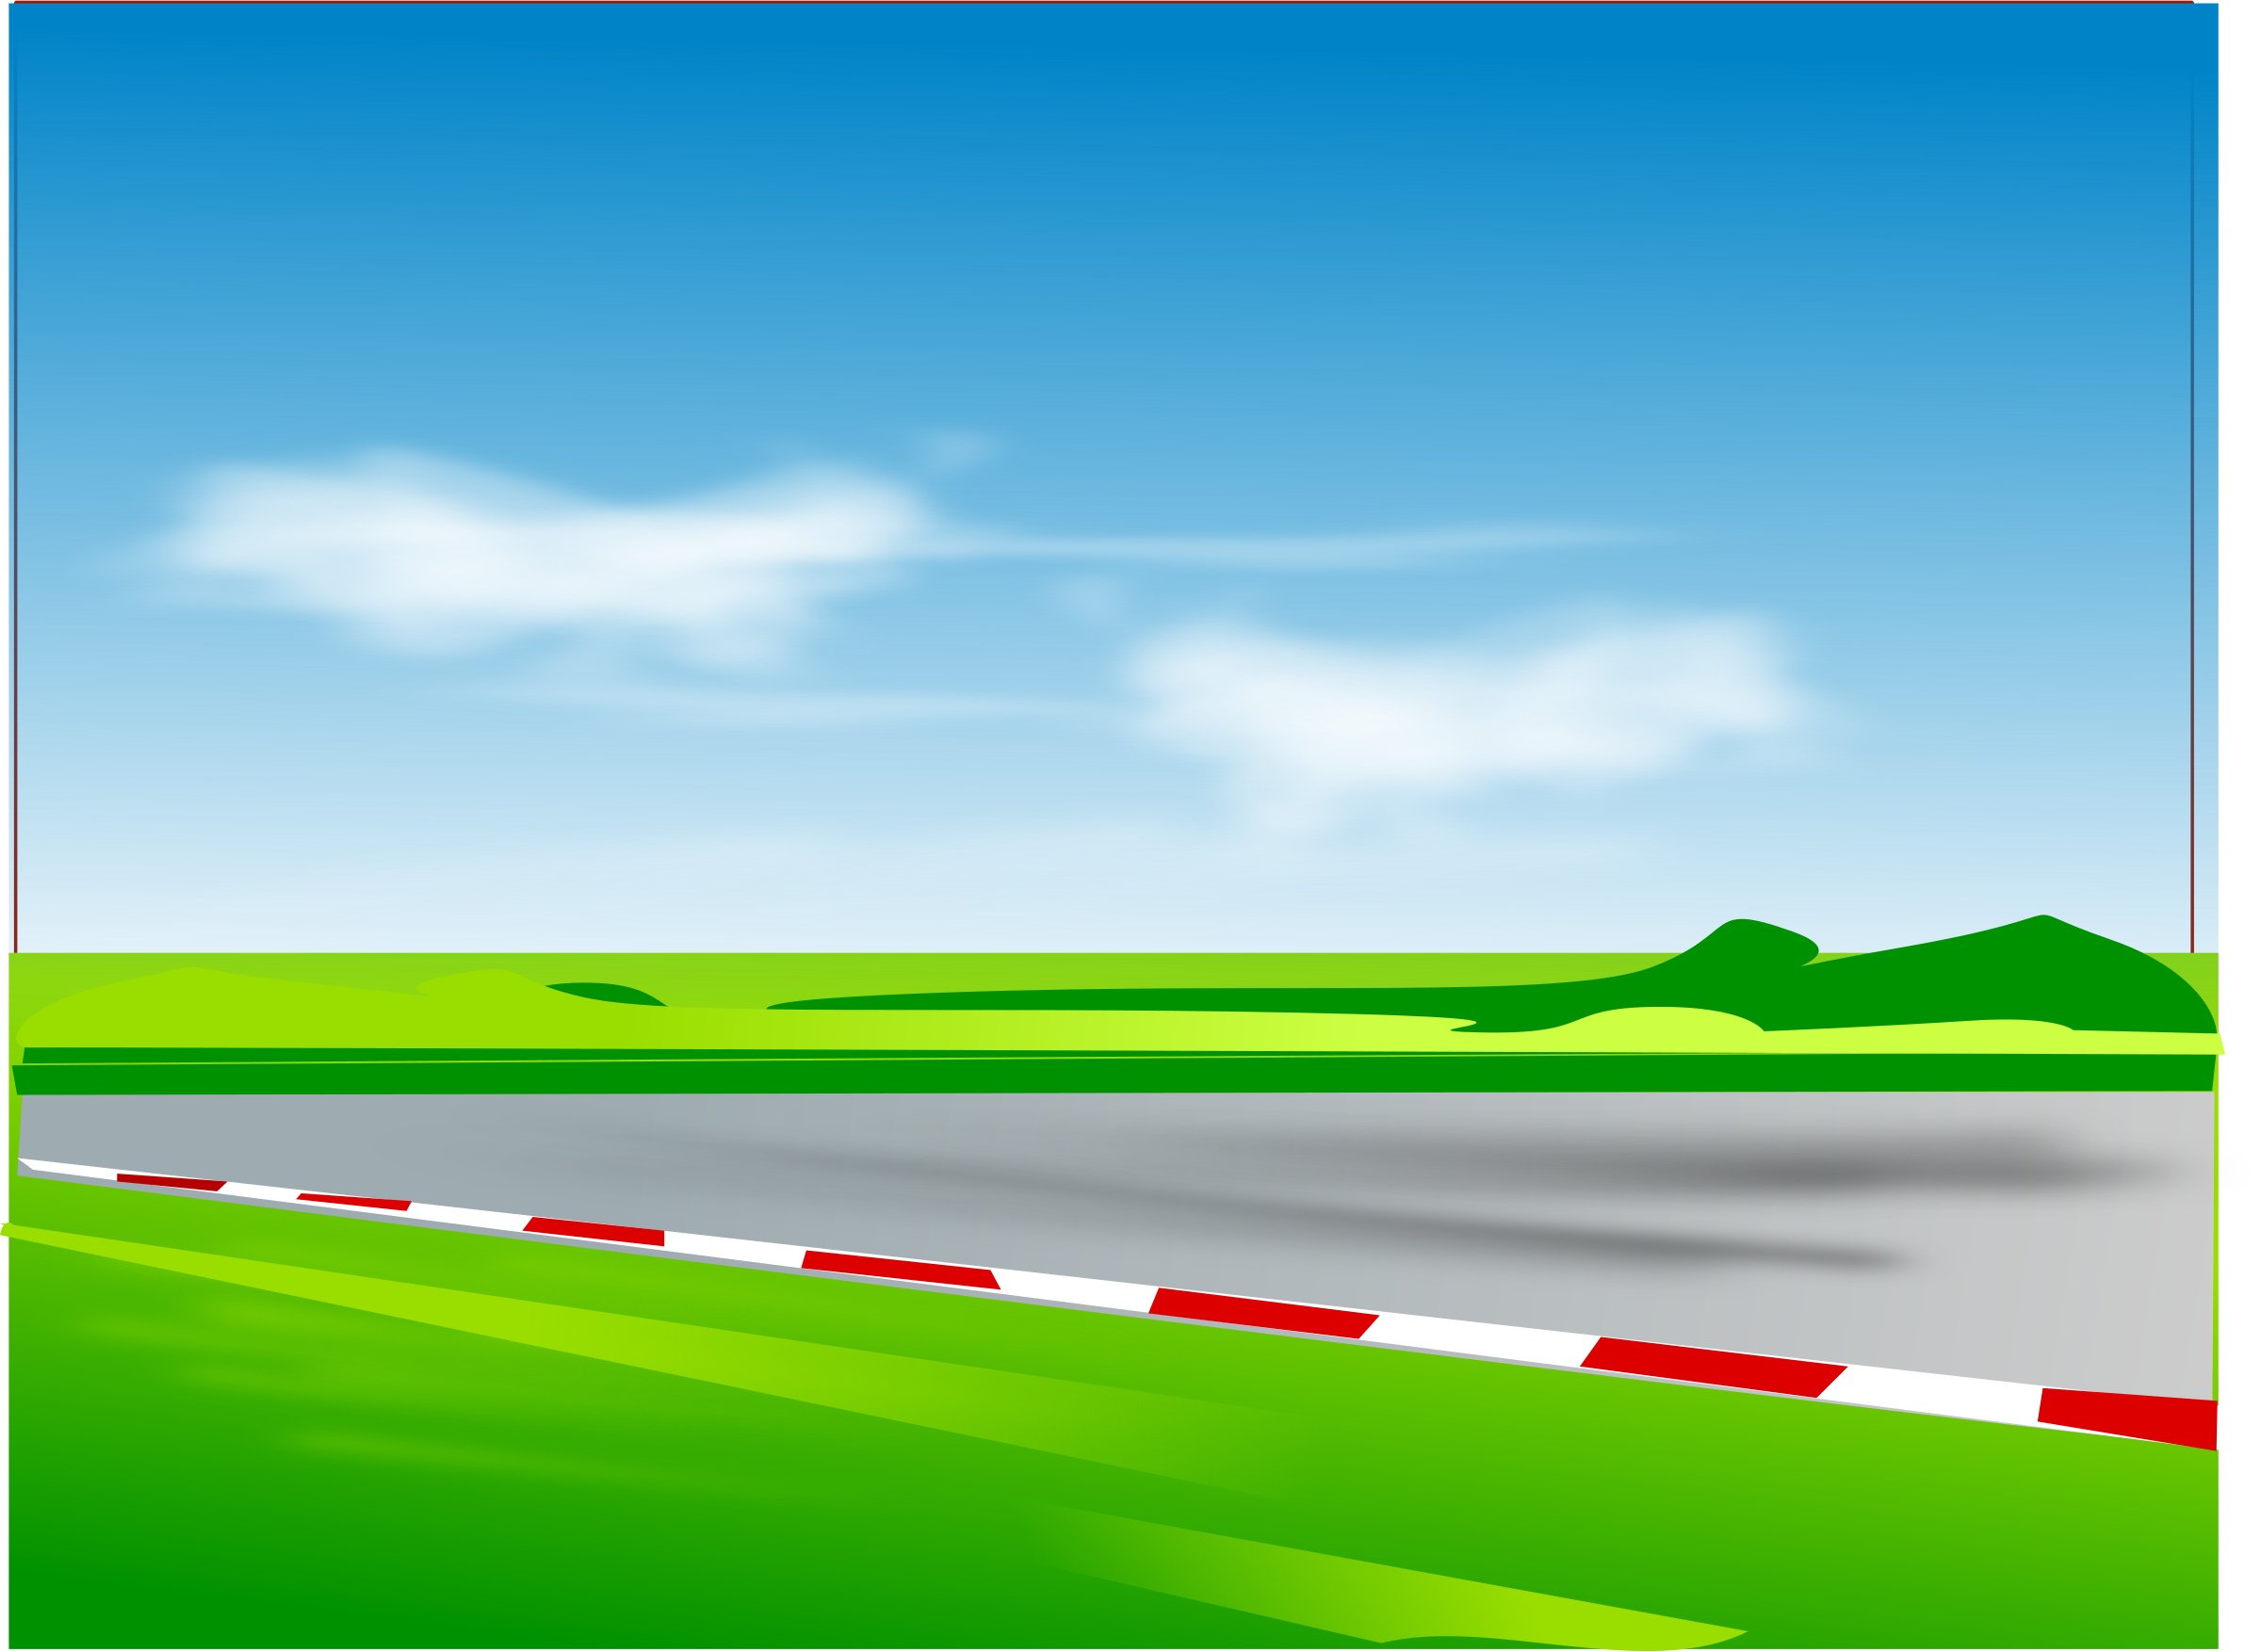 racing cars on the road clipart - Clipground